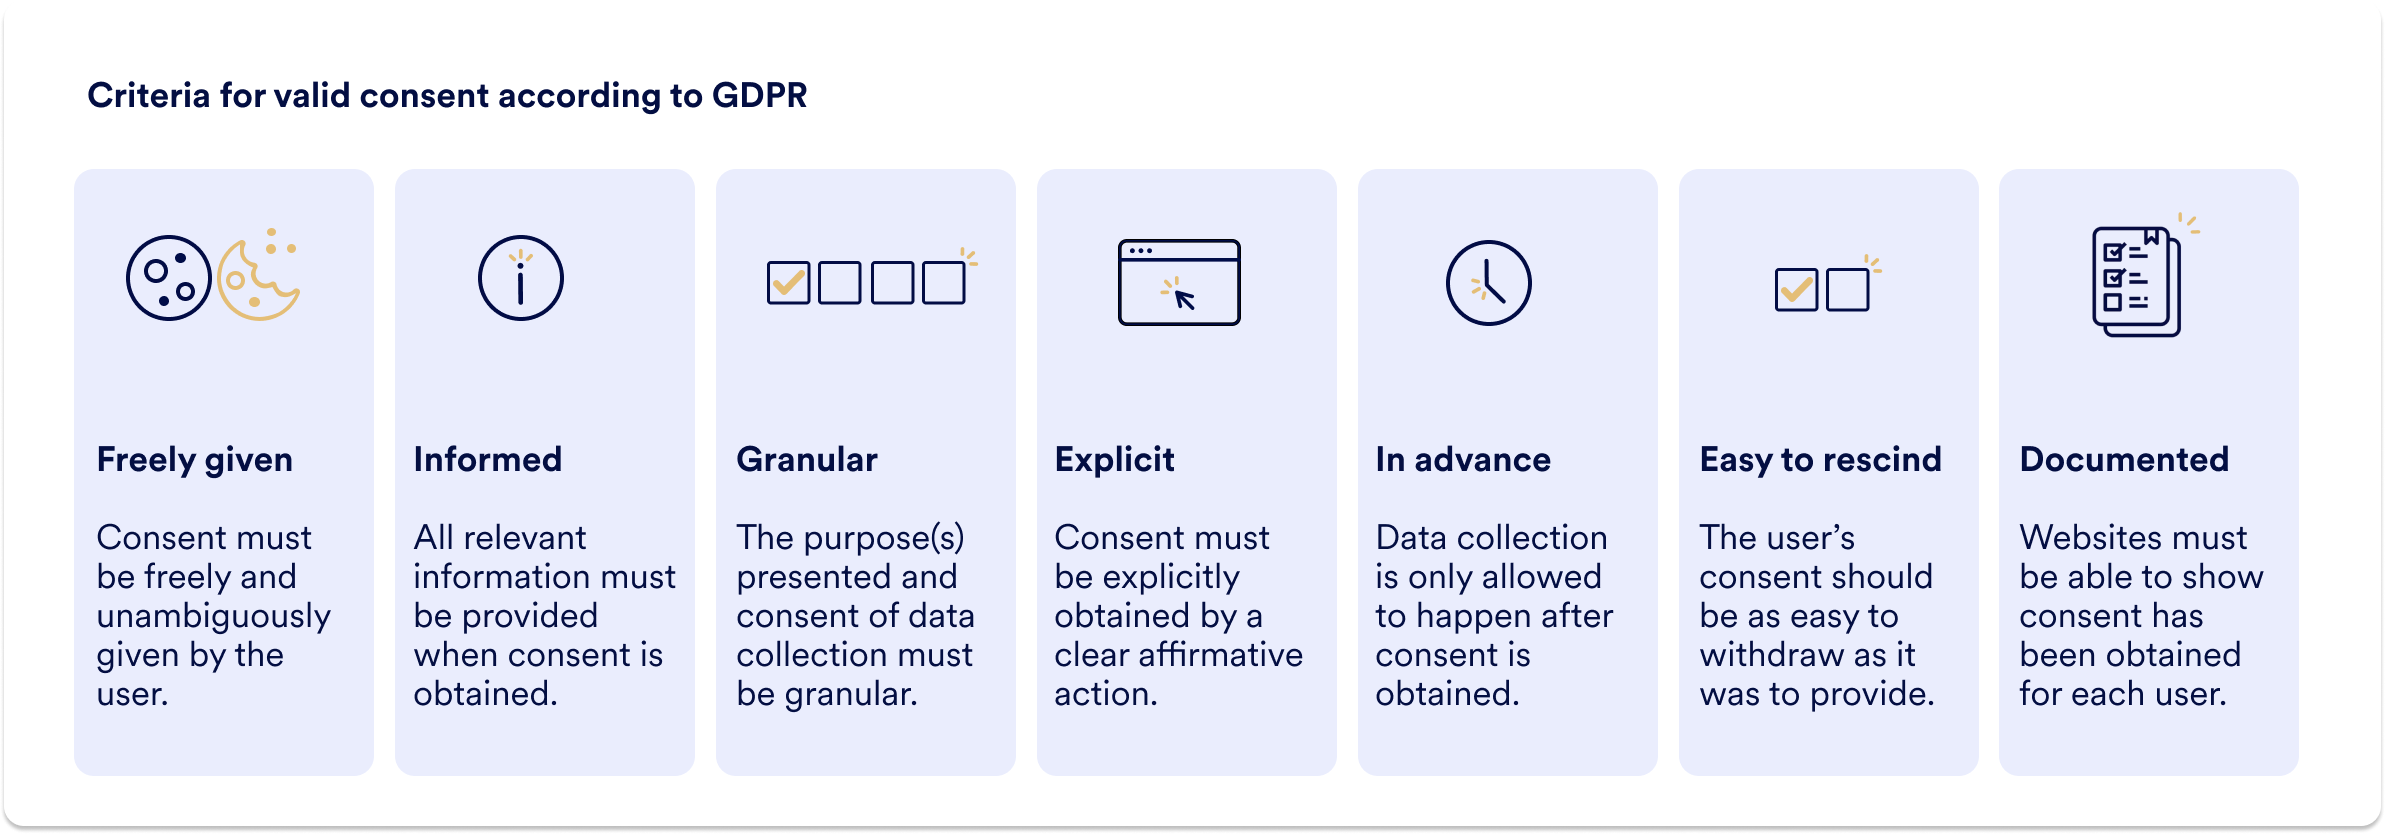 Criteria for valid consent according to GDPR